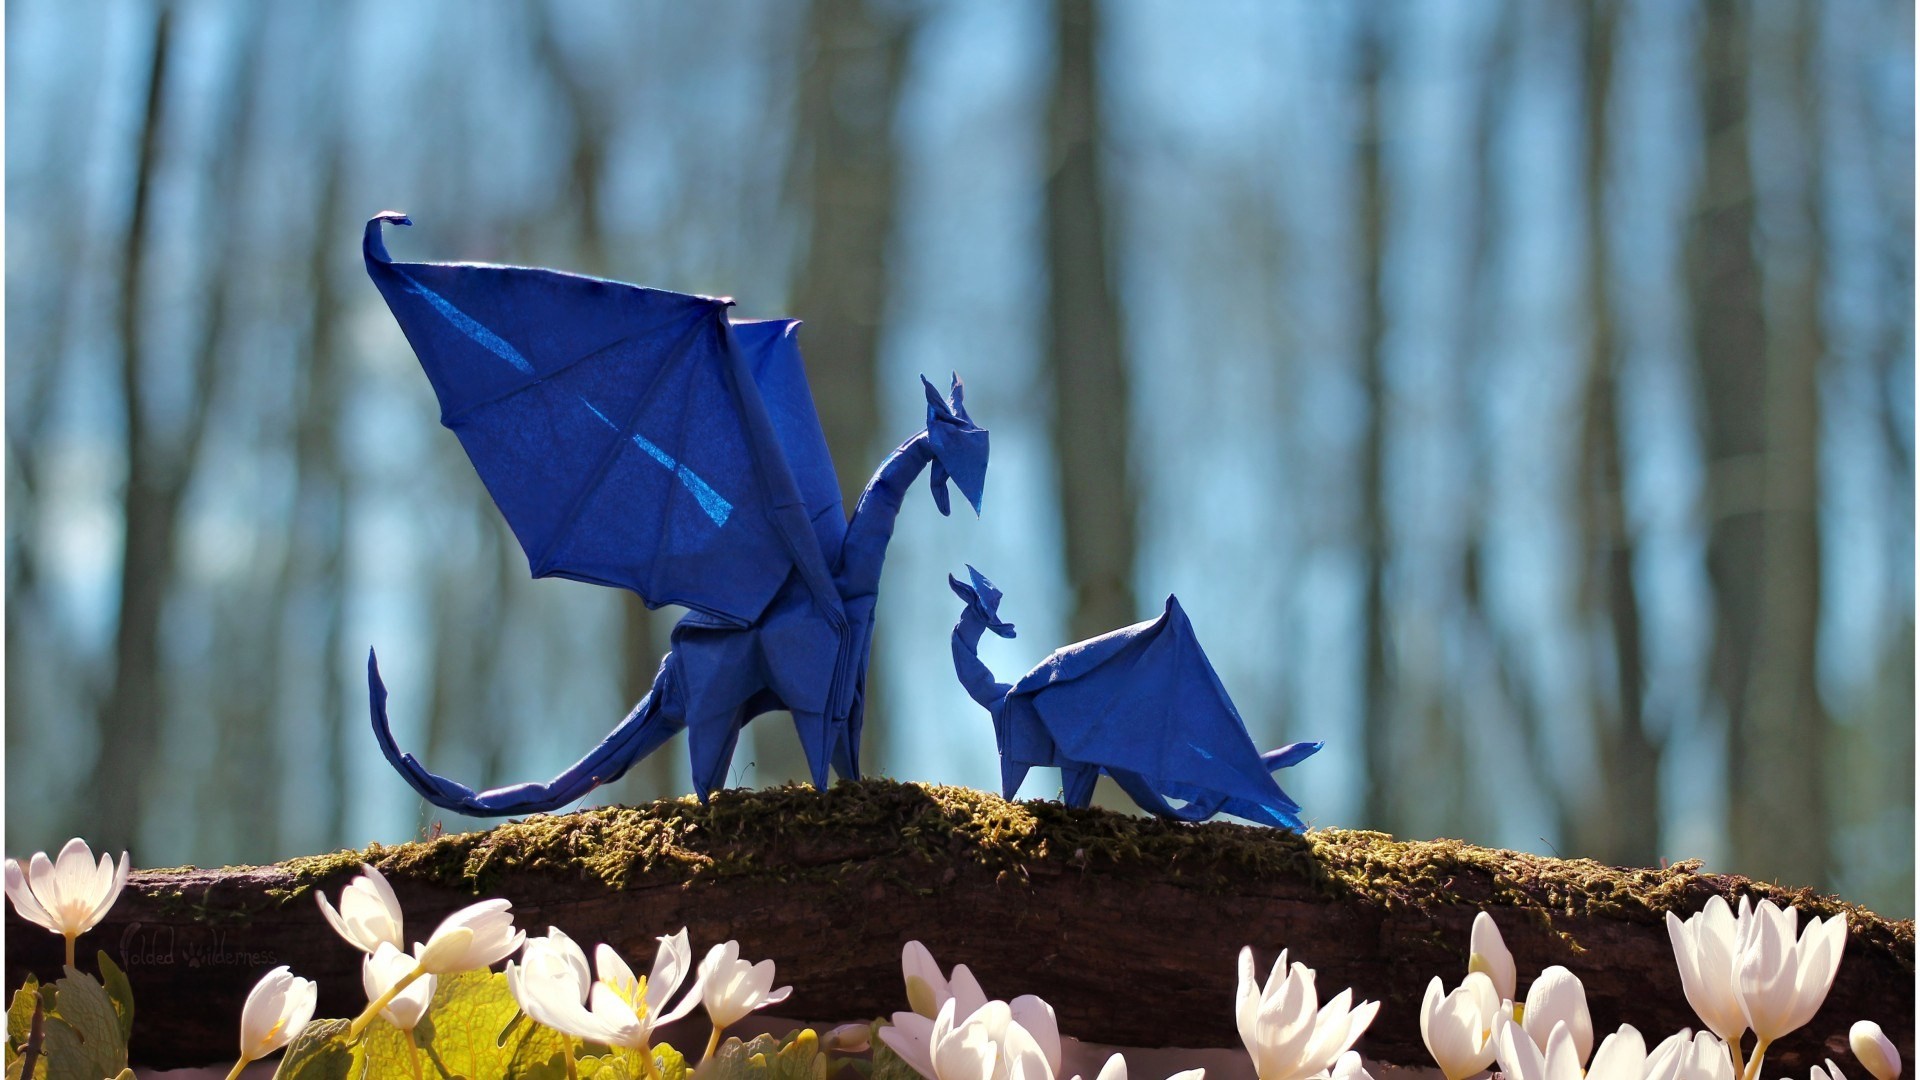 General 1920x1080 dragon wings fantasy art nature origami paper depth of field trees branch flowers tail plants